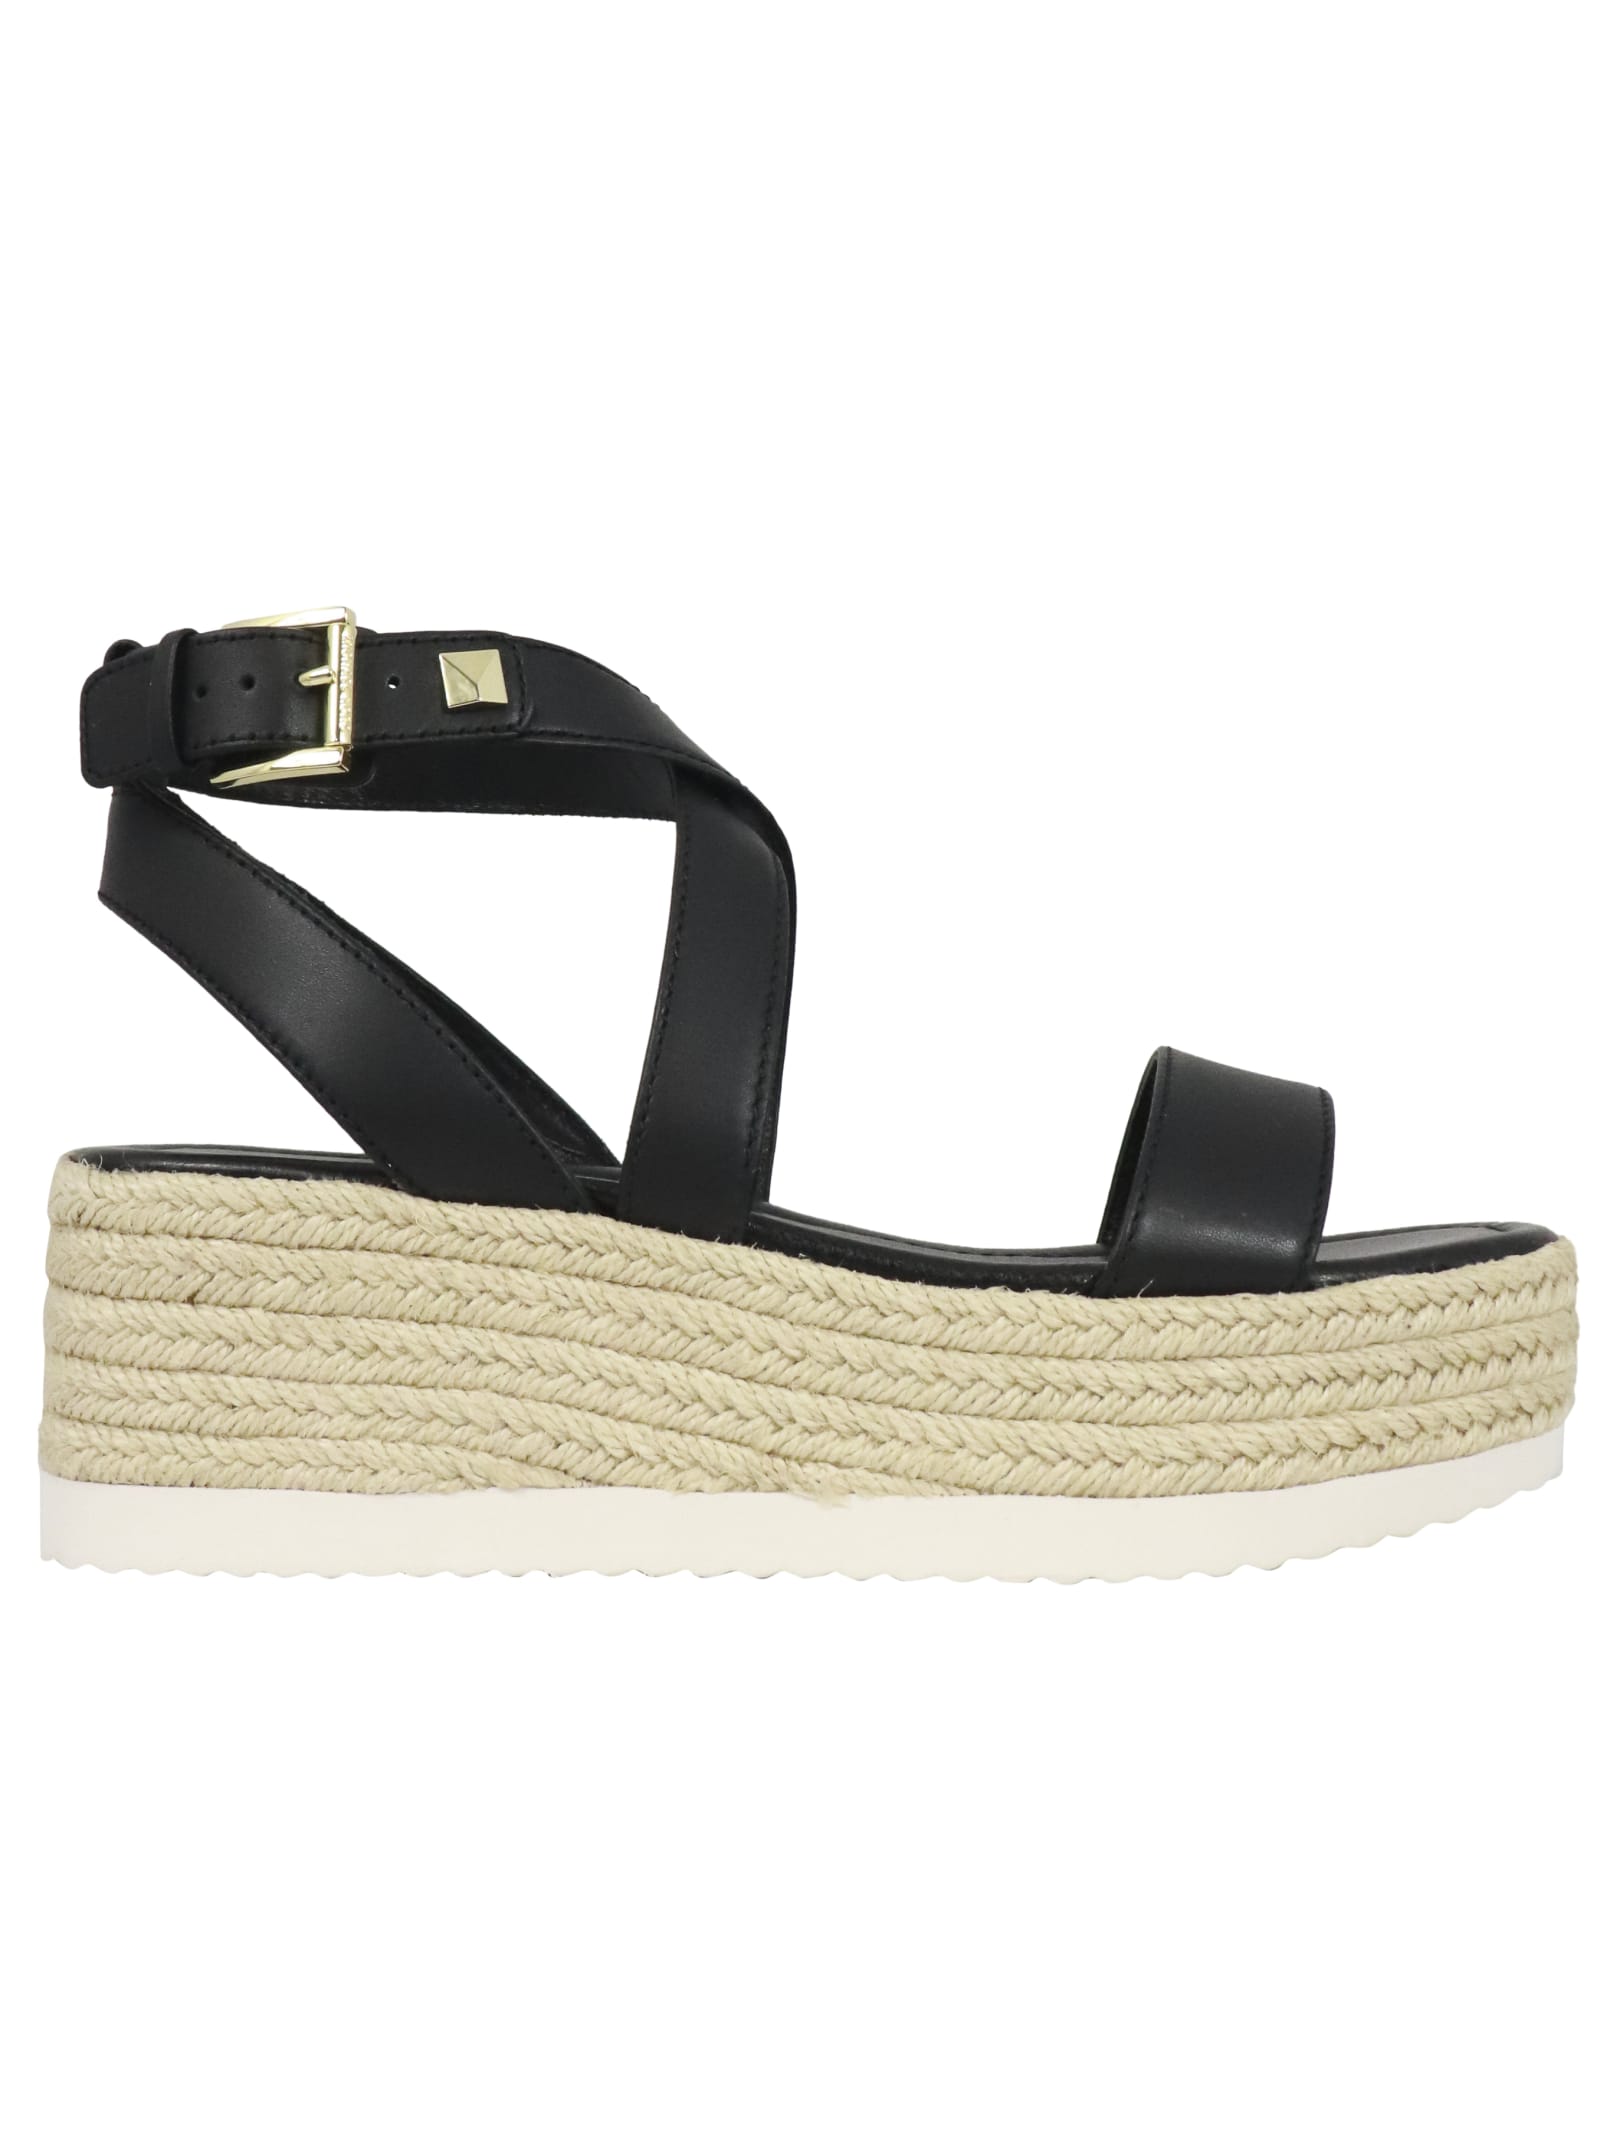 Buy Michael Kors Lowry Wedge Wedge online, shop Michael Kors shoes with free shipping